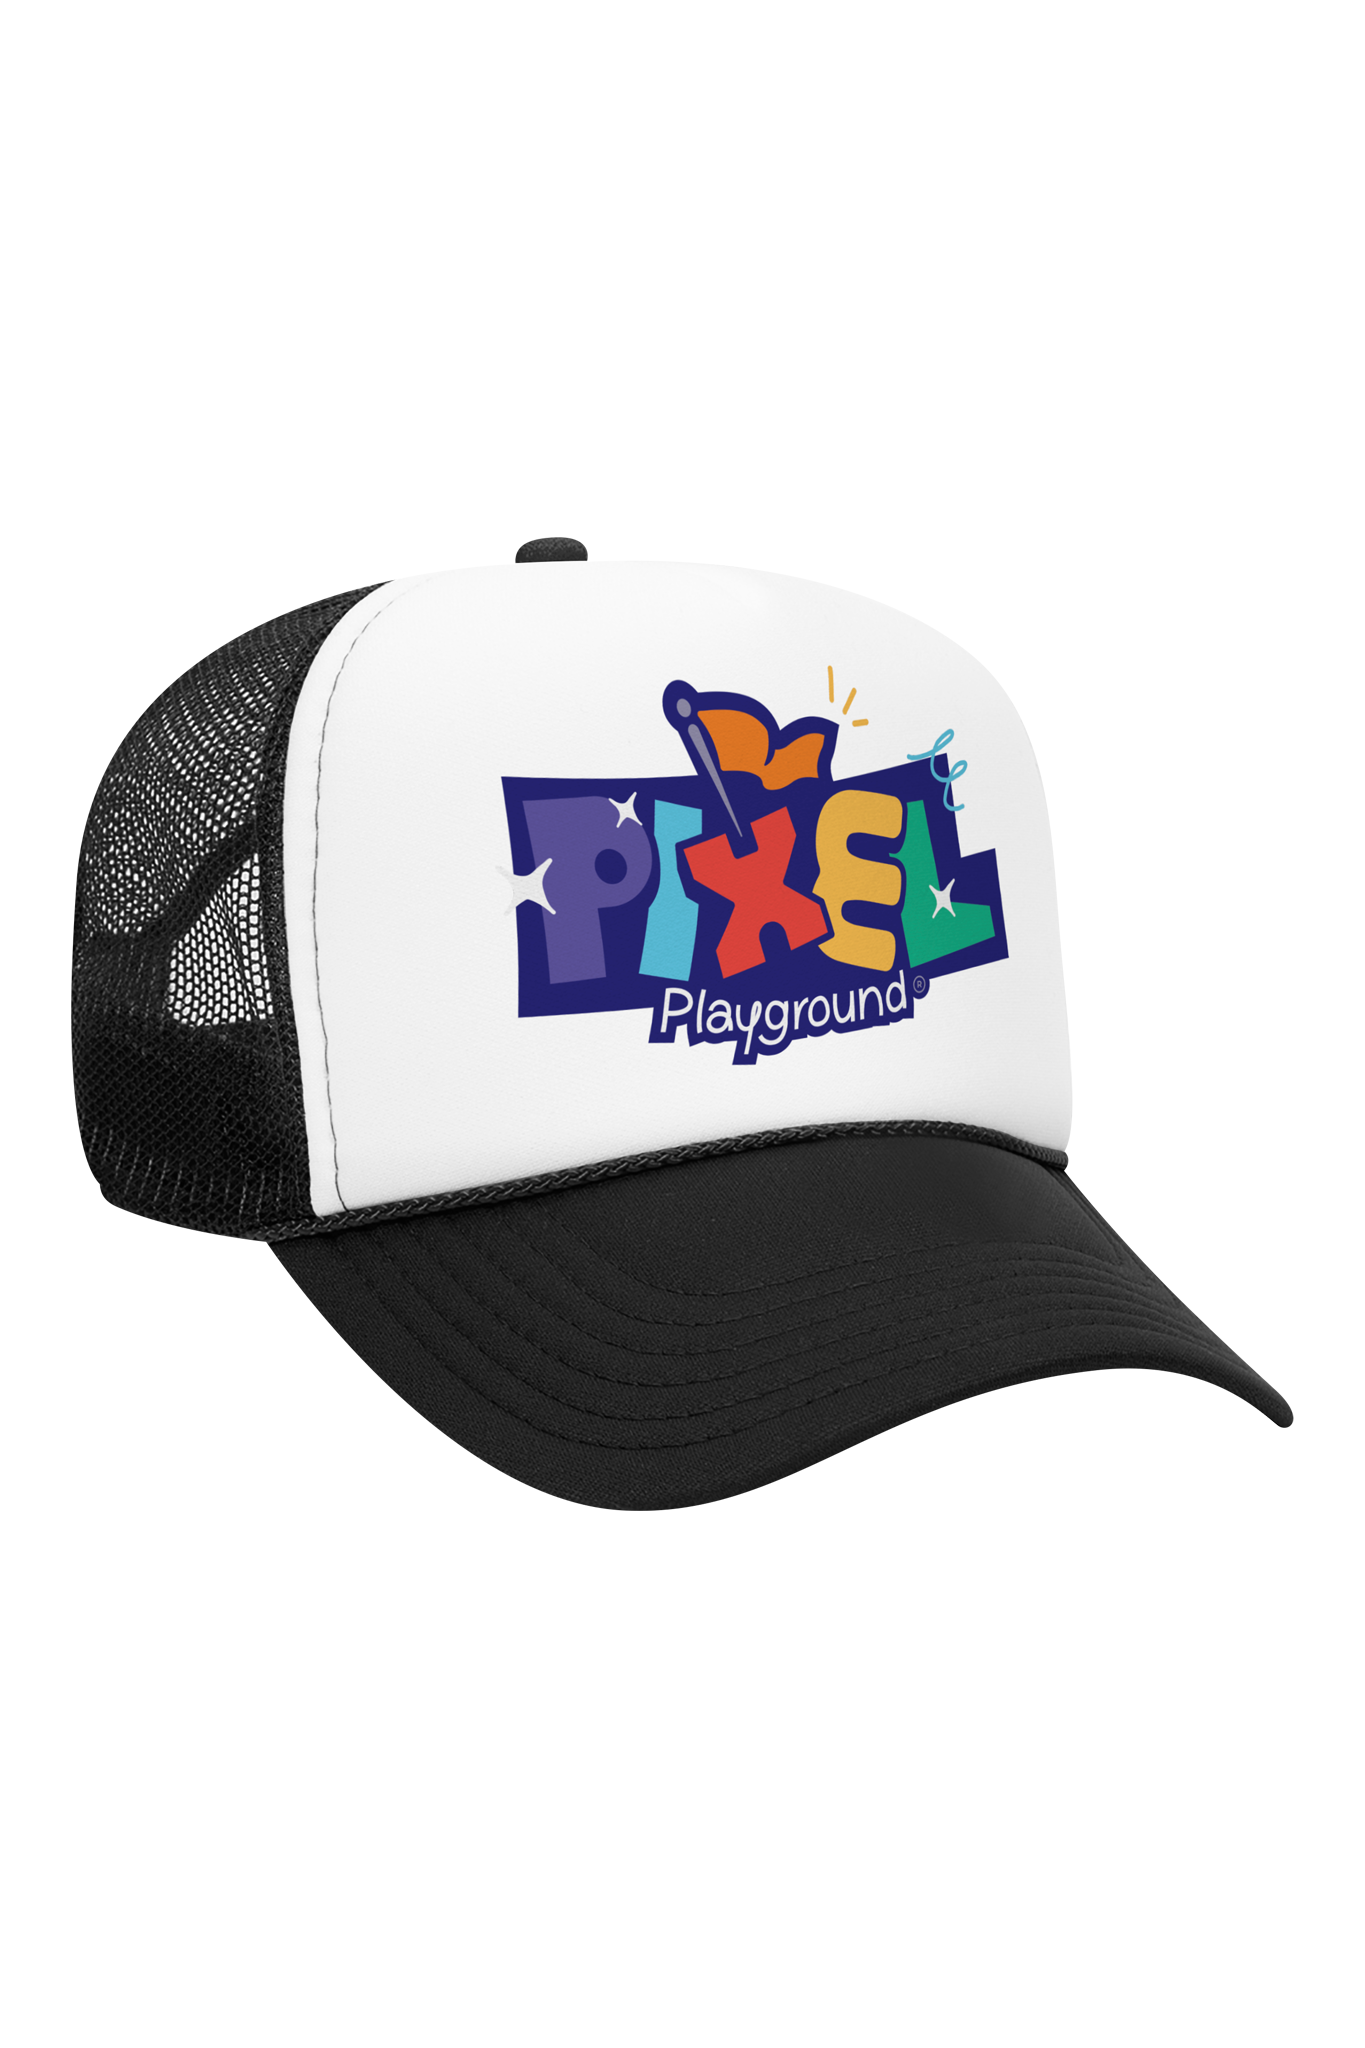 Black and white cap featuring the Pixel Playground logo.